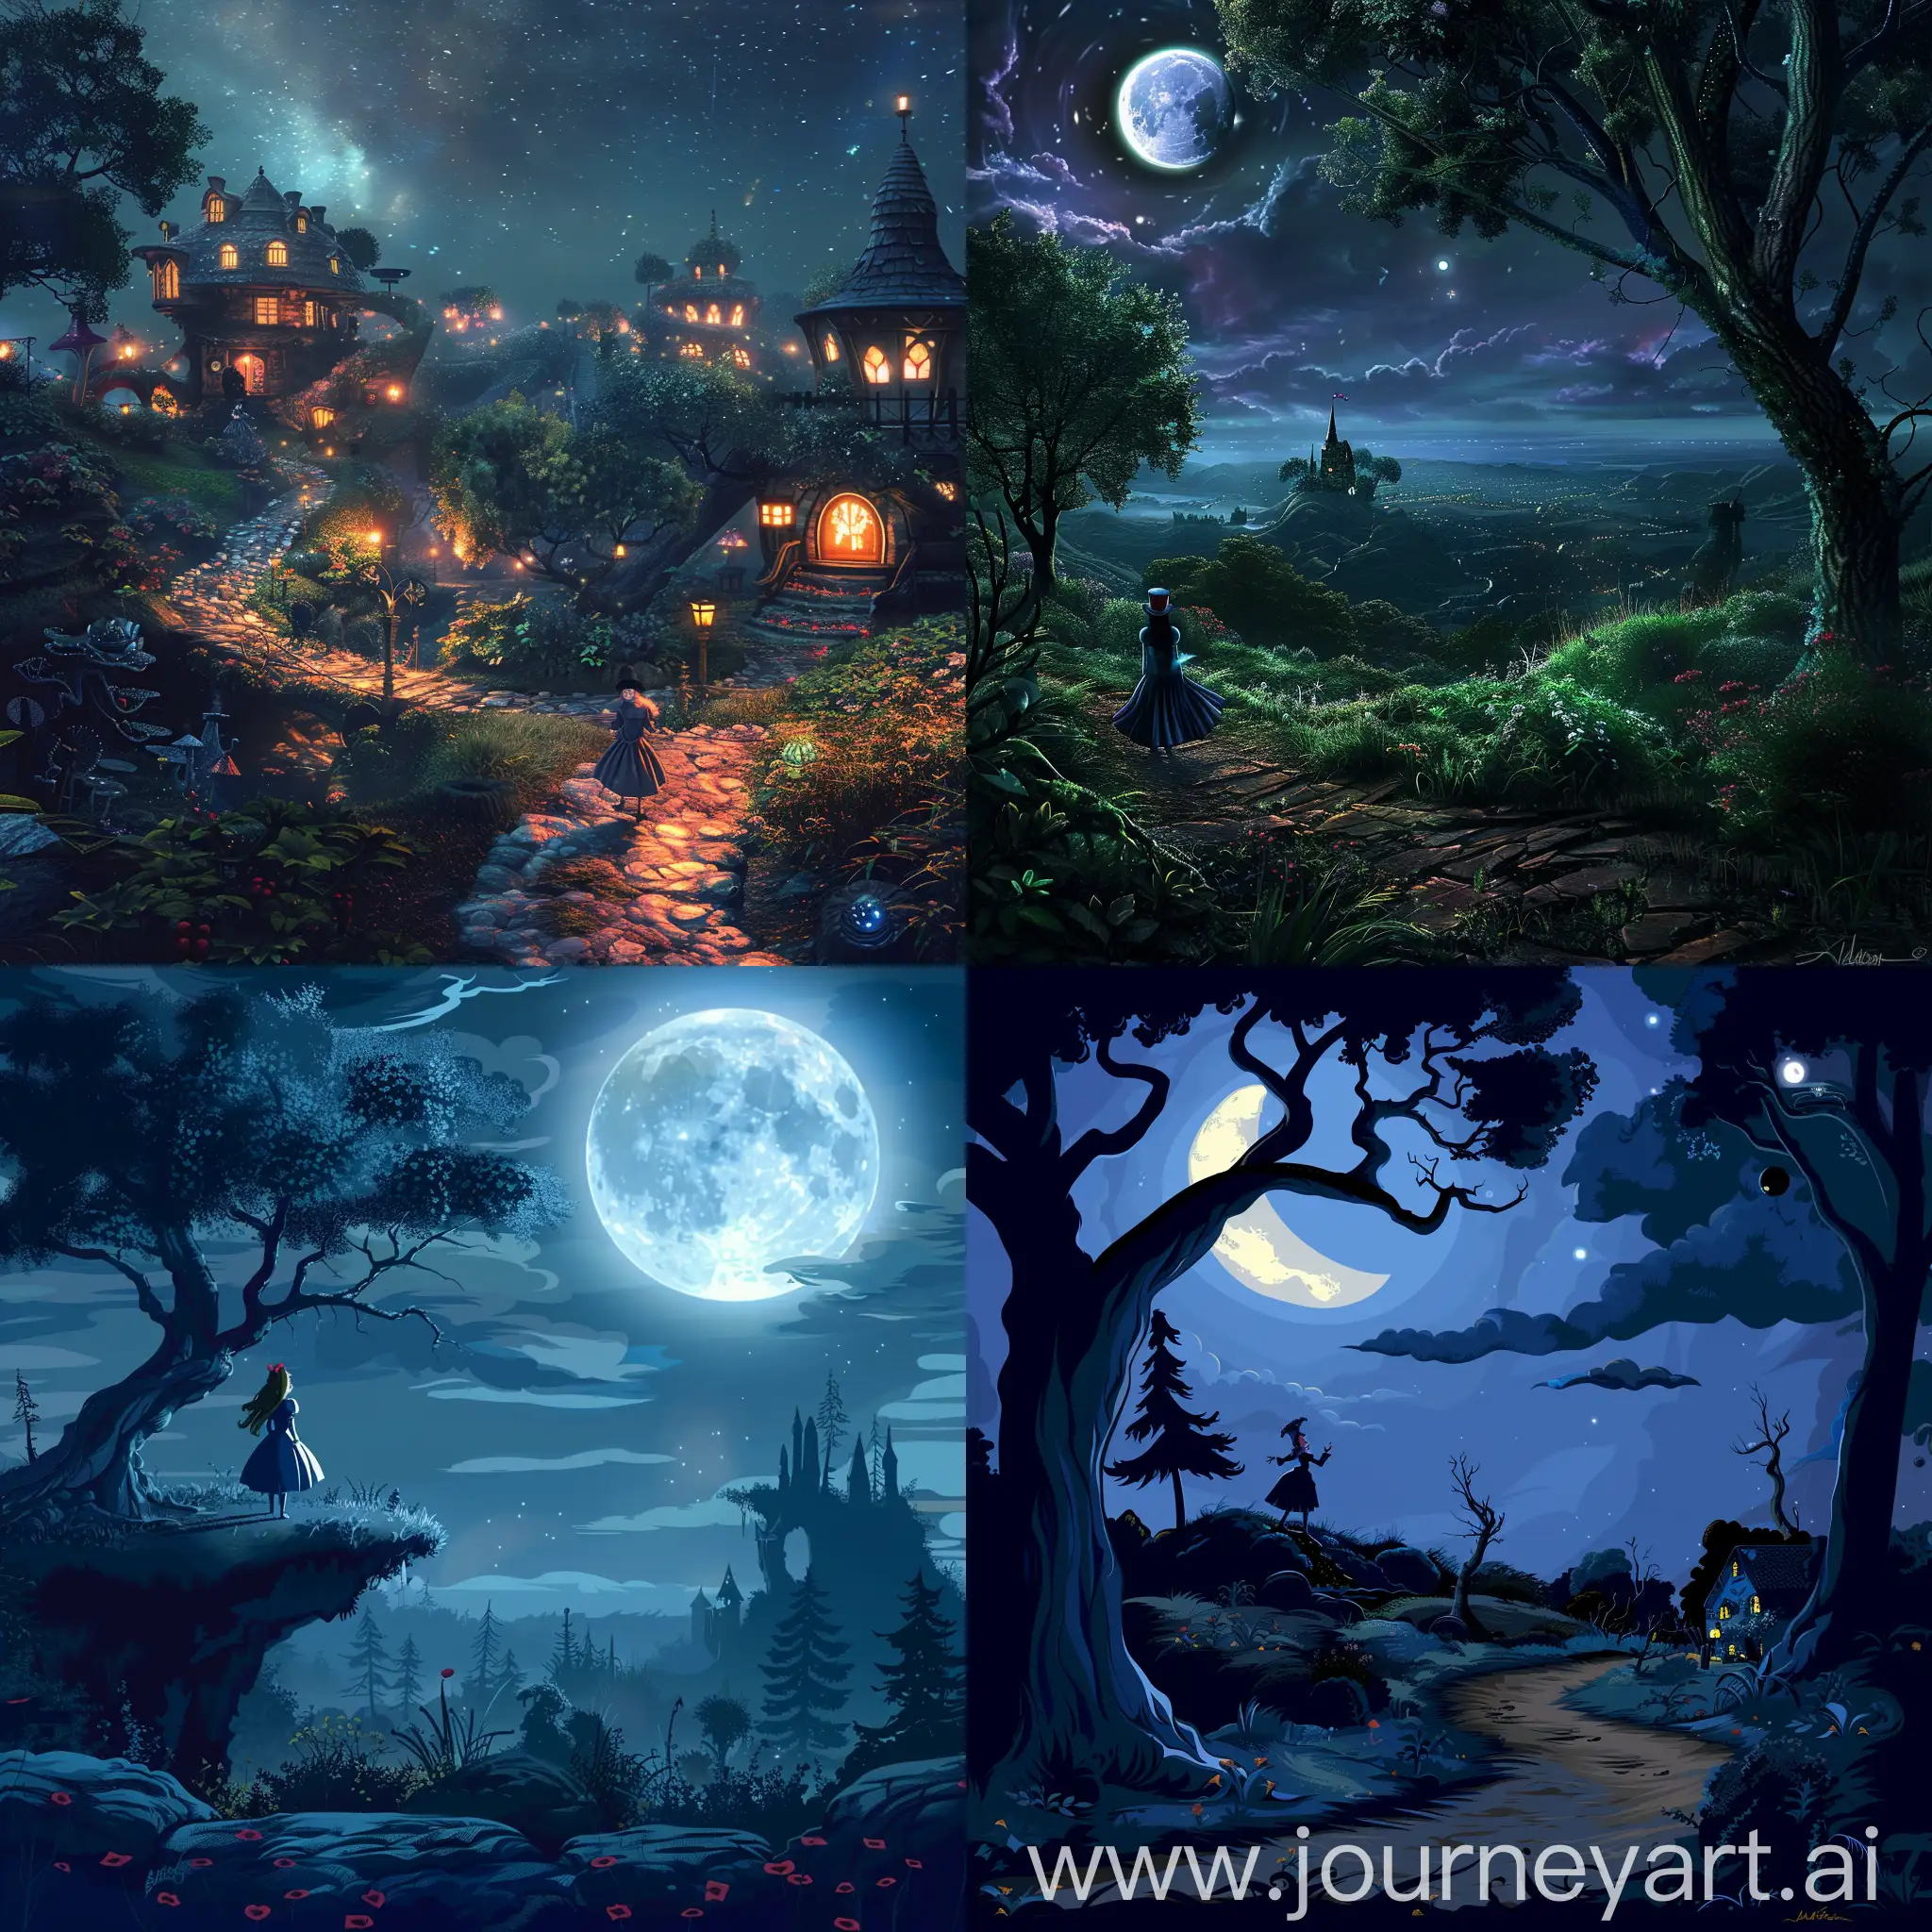 Alice in Wonderland type landscape without any character by night, high resolution